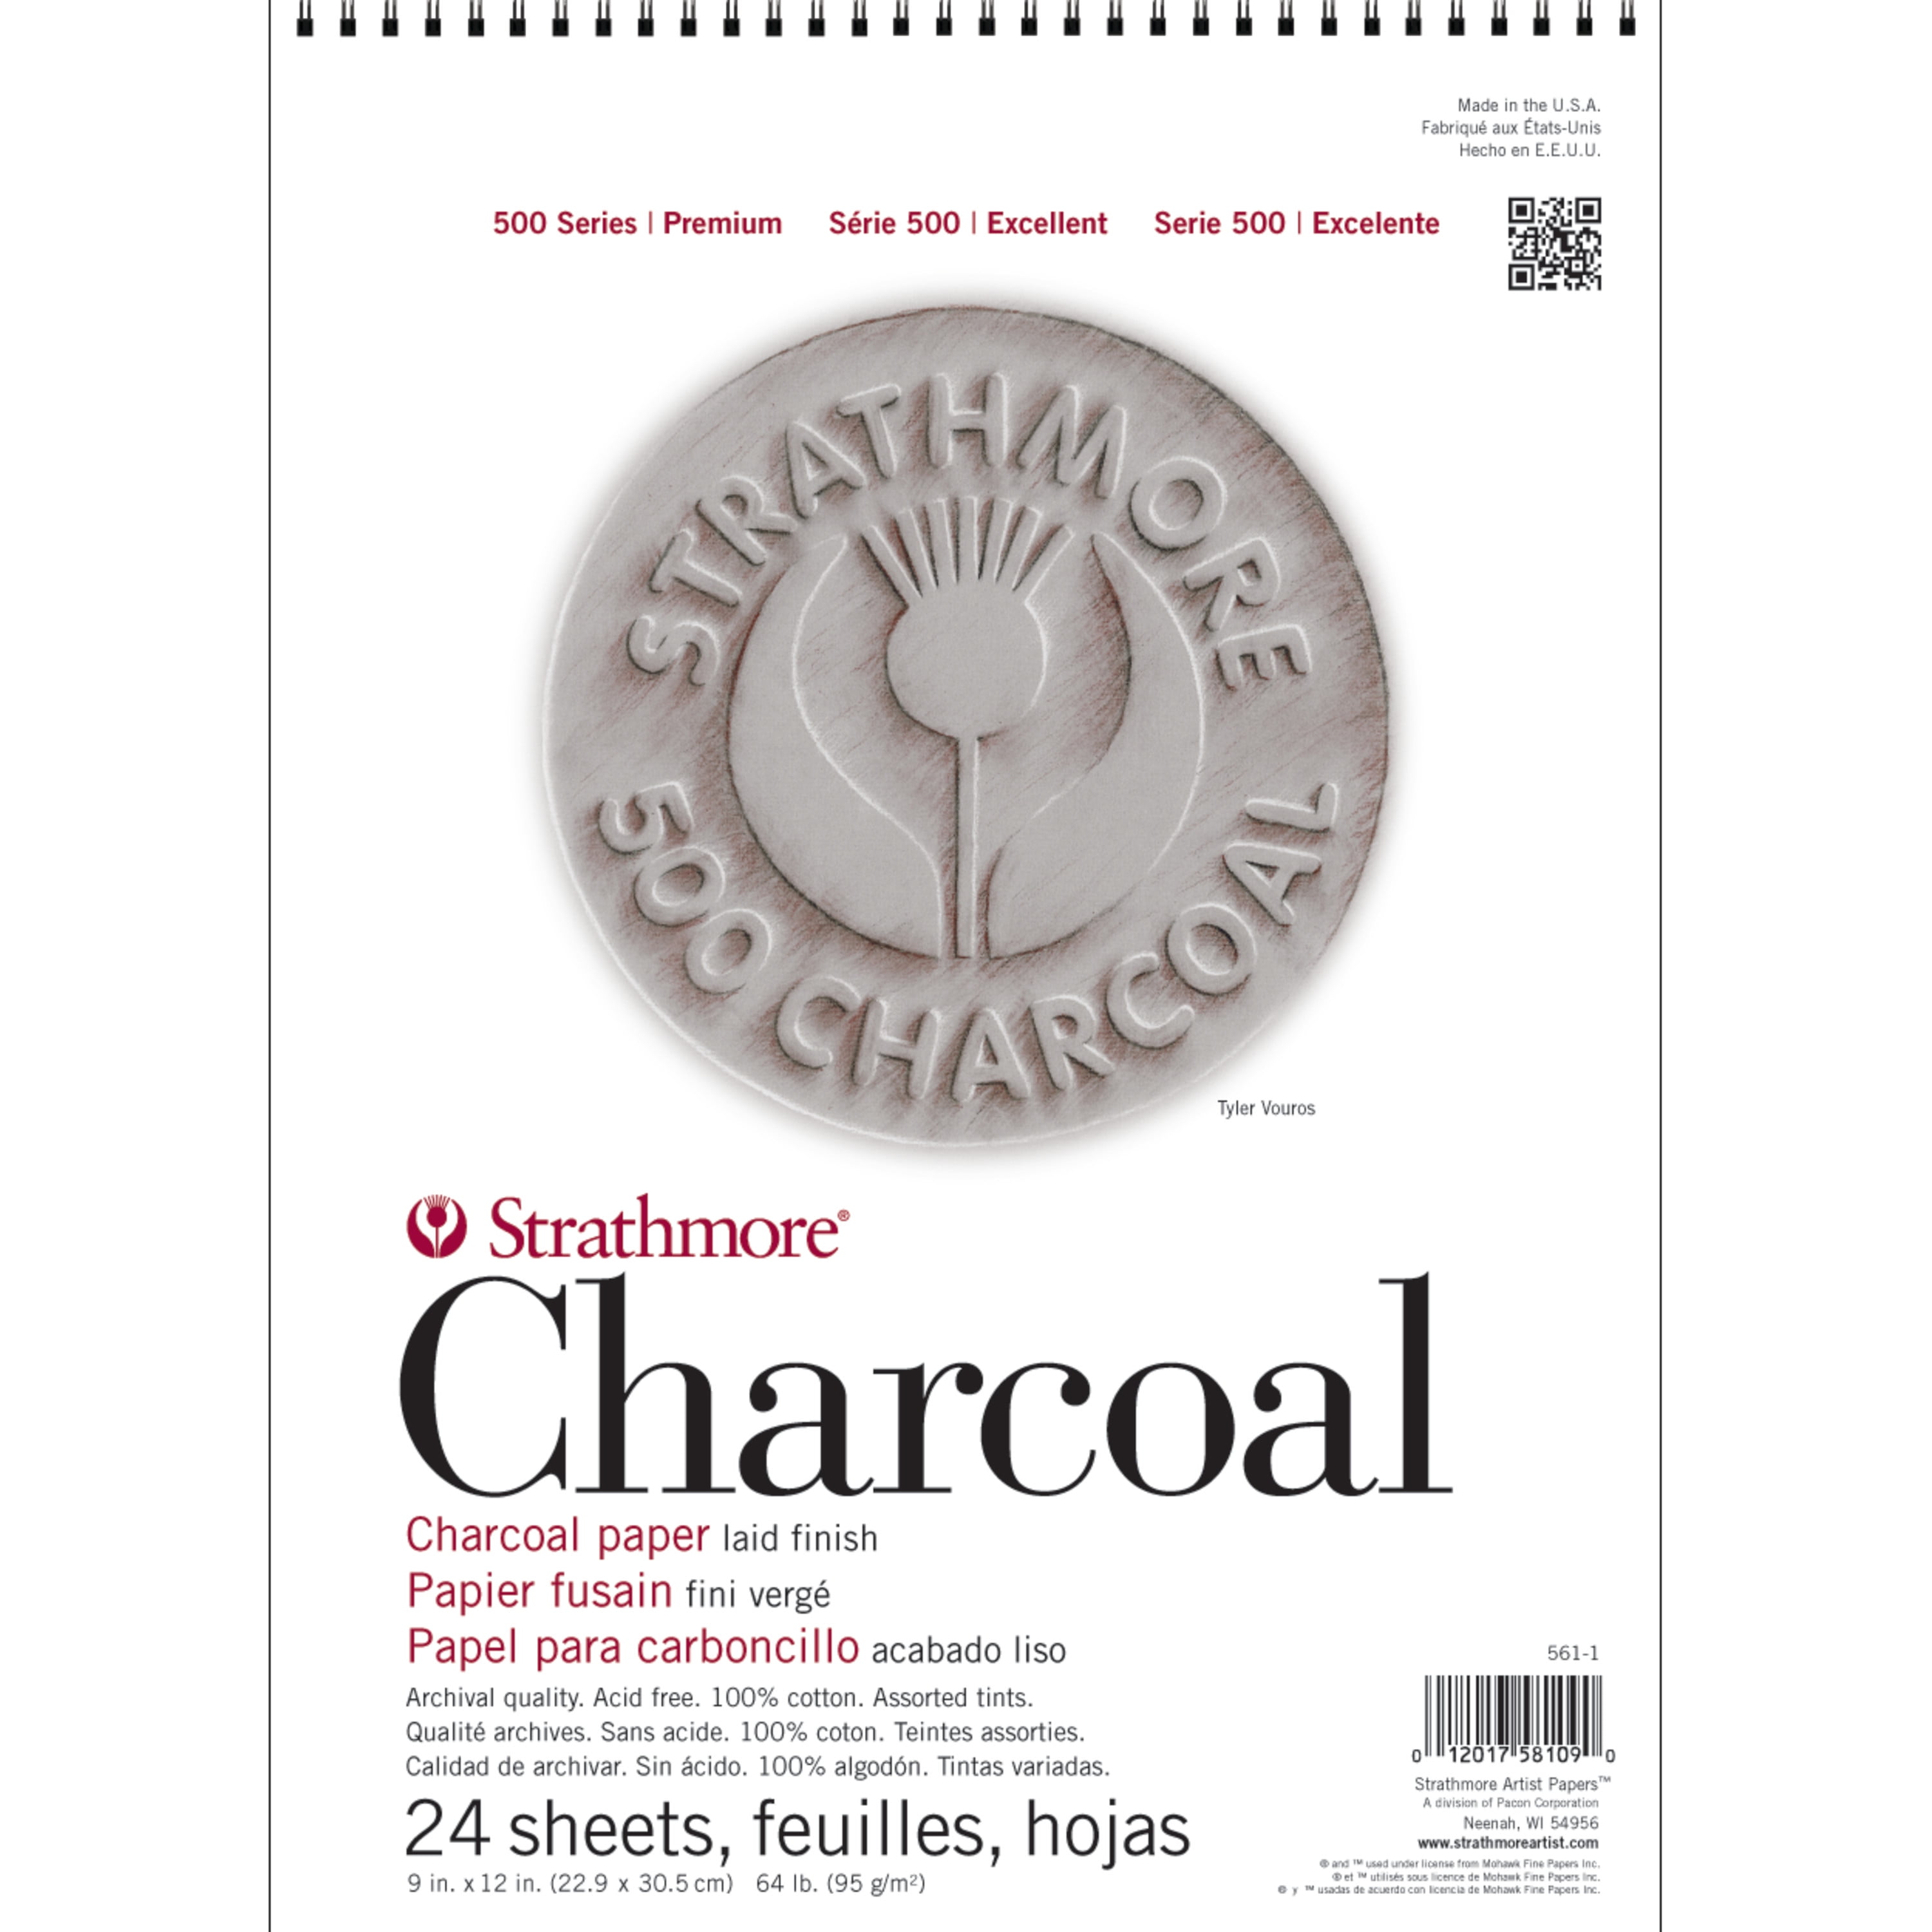 Strathmore 500 Series Charcoal Papers